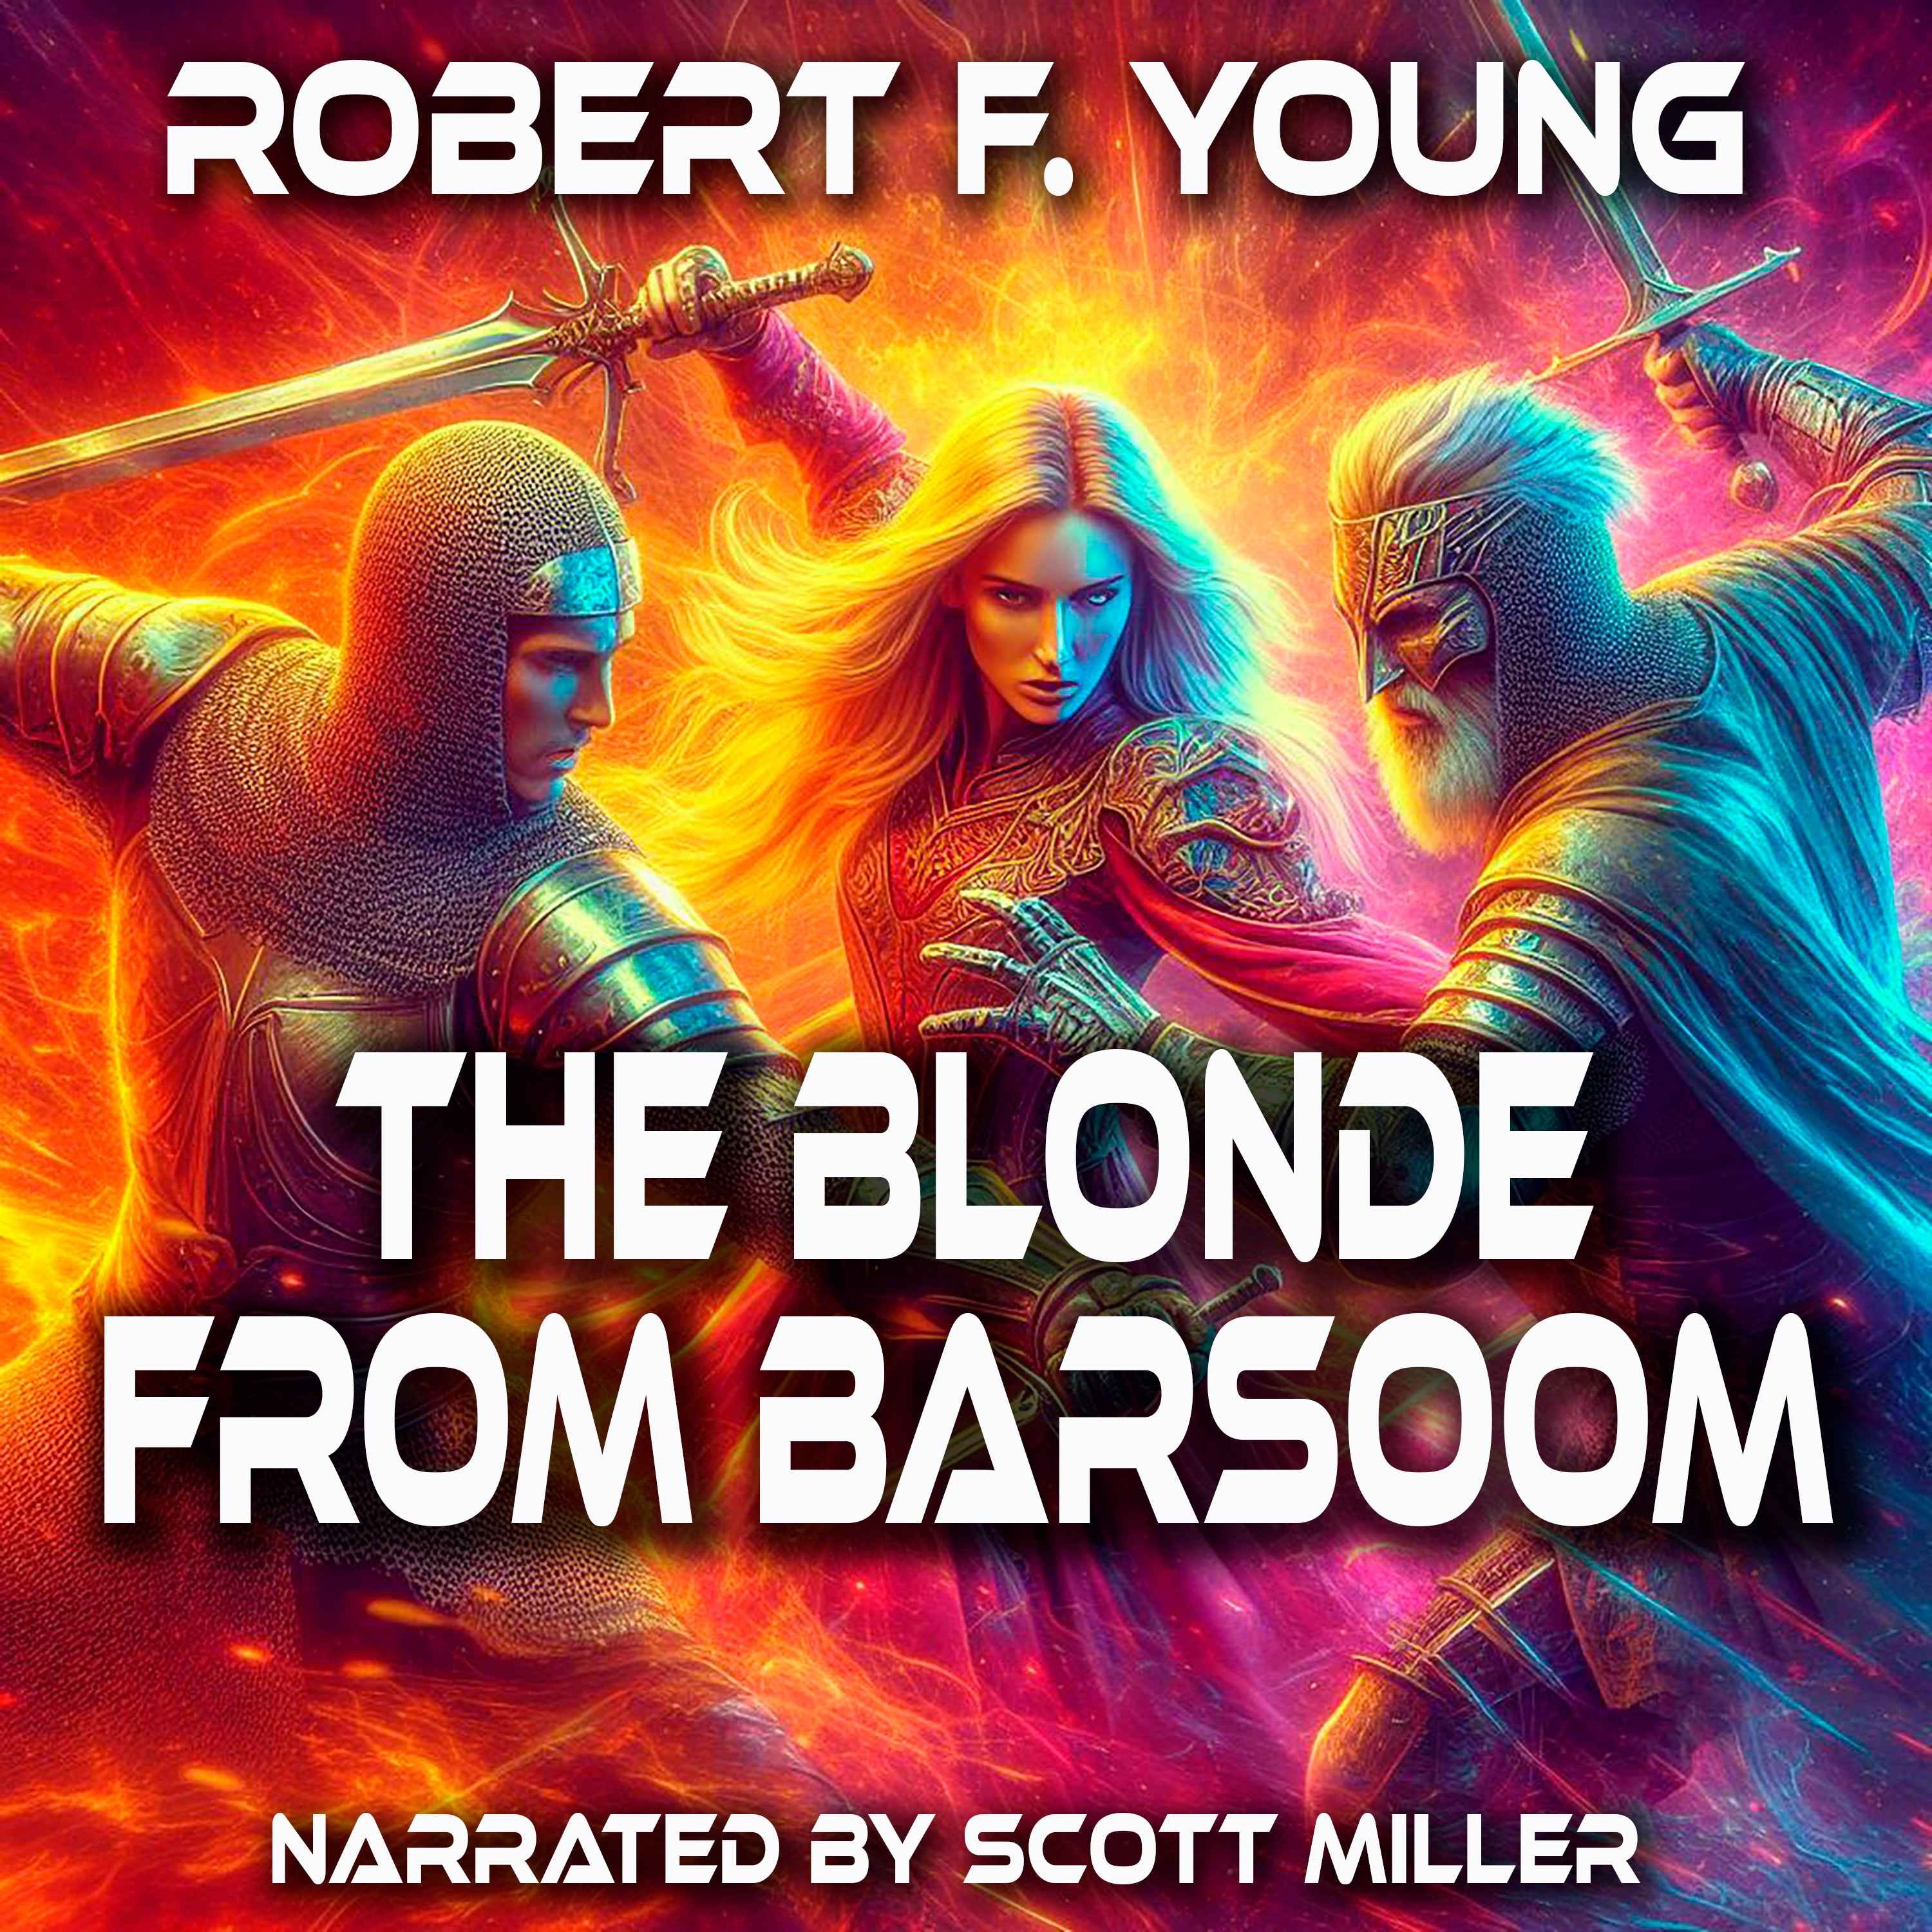 The Blonde From Barsoom by Robert F. Young - A Story Inspired by Edgar Rice Burroughs